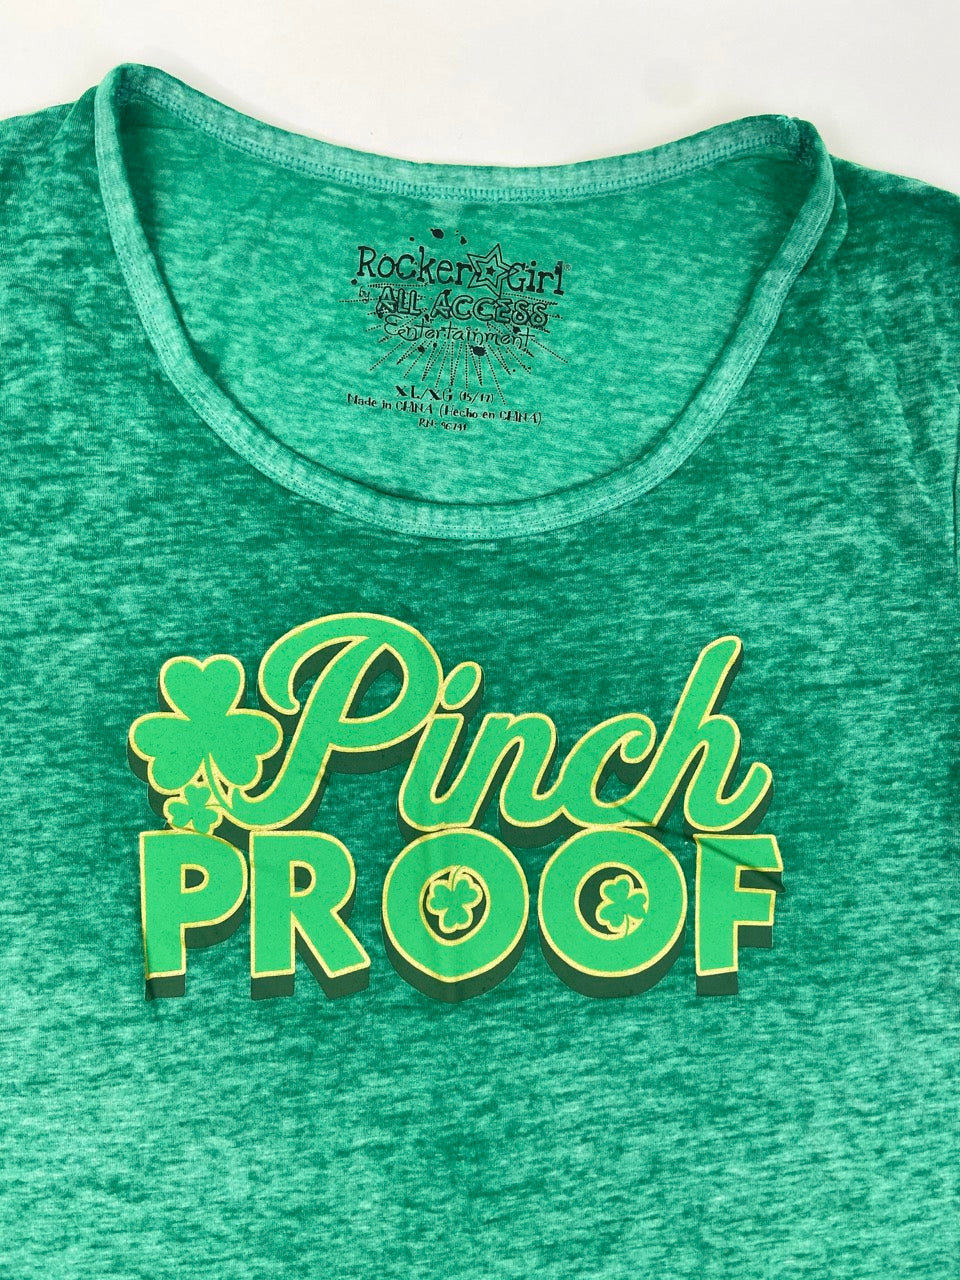 Pinch Proof Tee- Youth XL